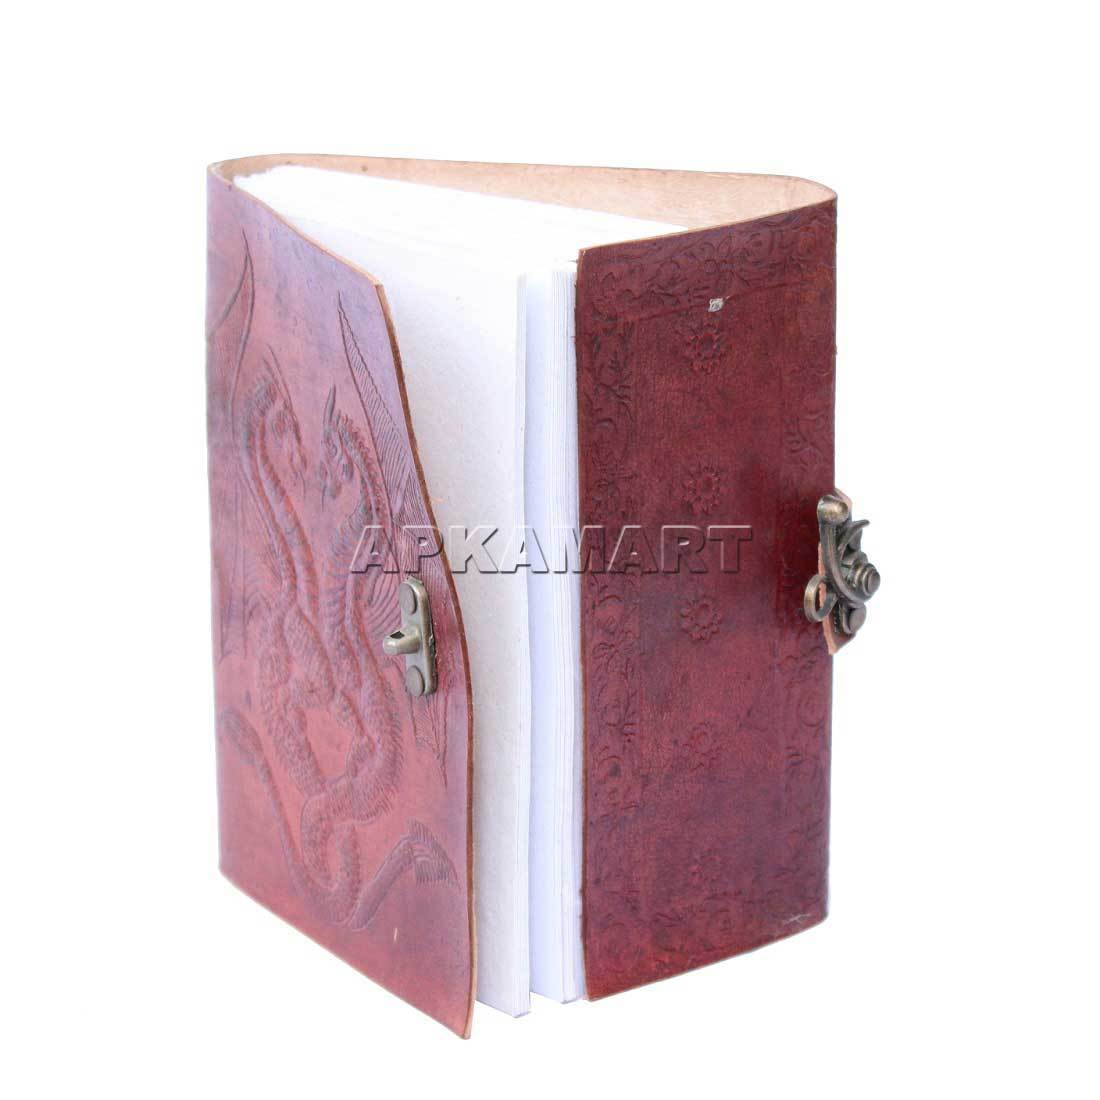 Personal Diary | Leather Journal - for Men & Women -7 inch - ApkaMart